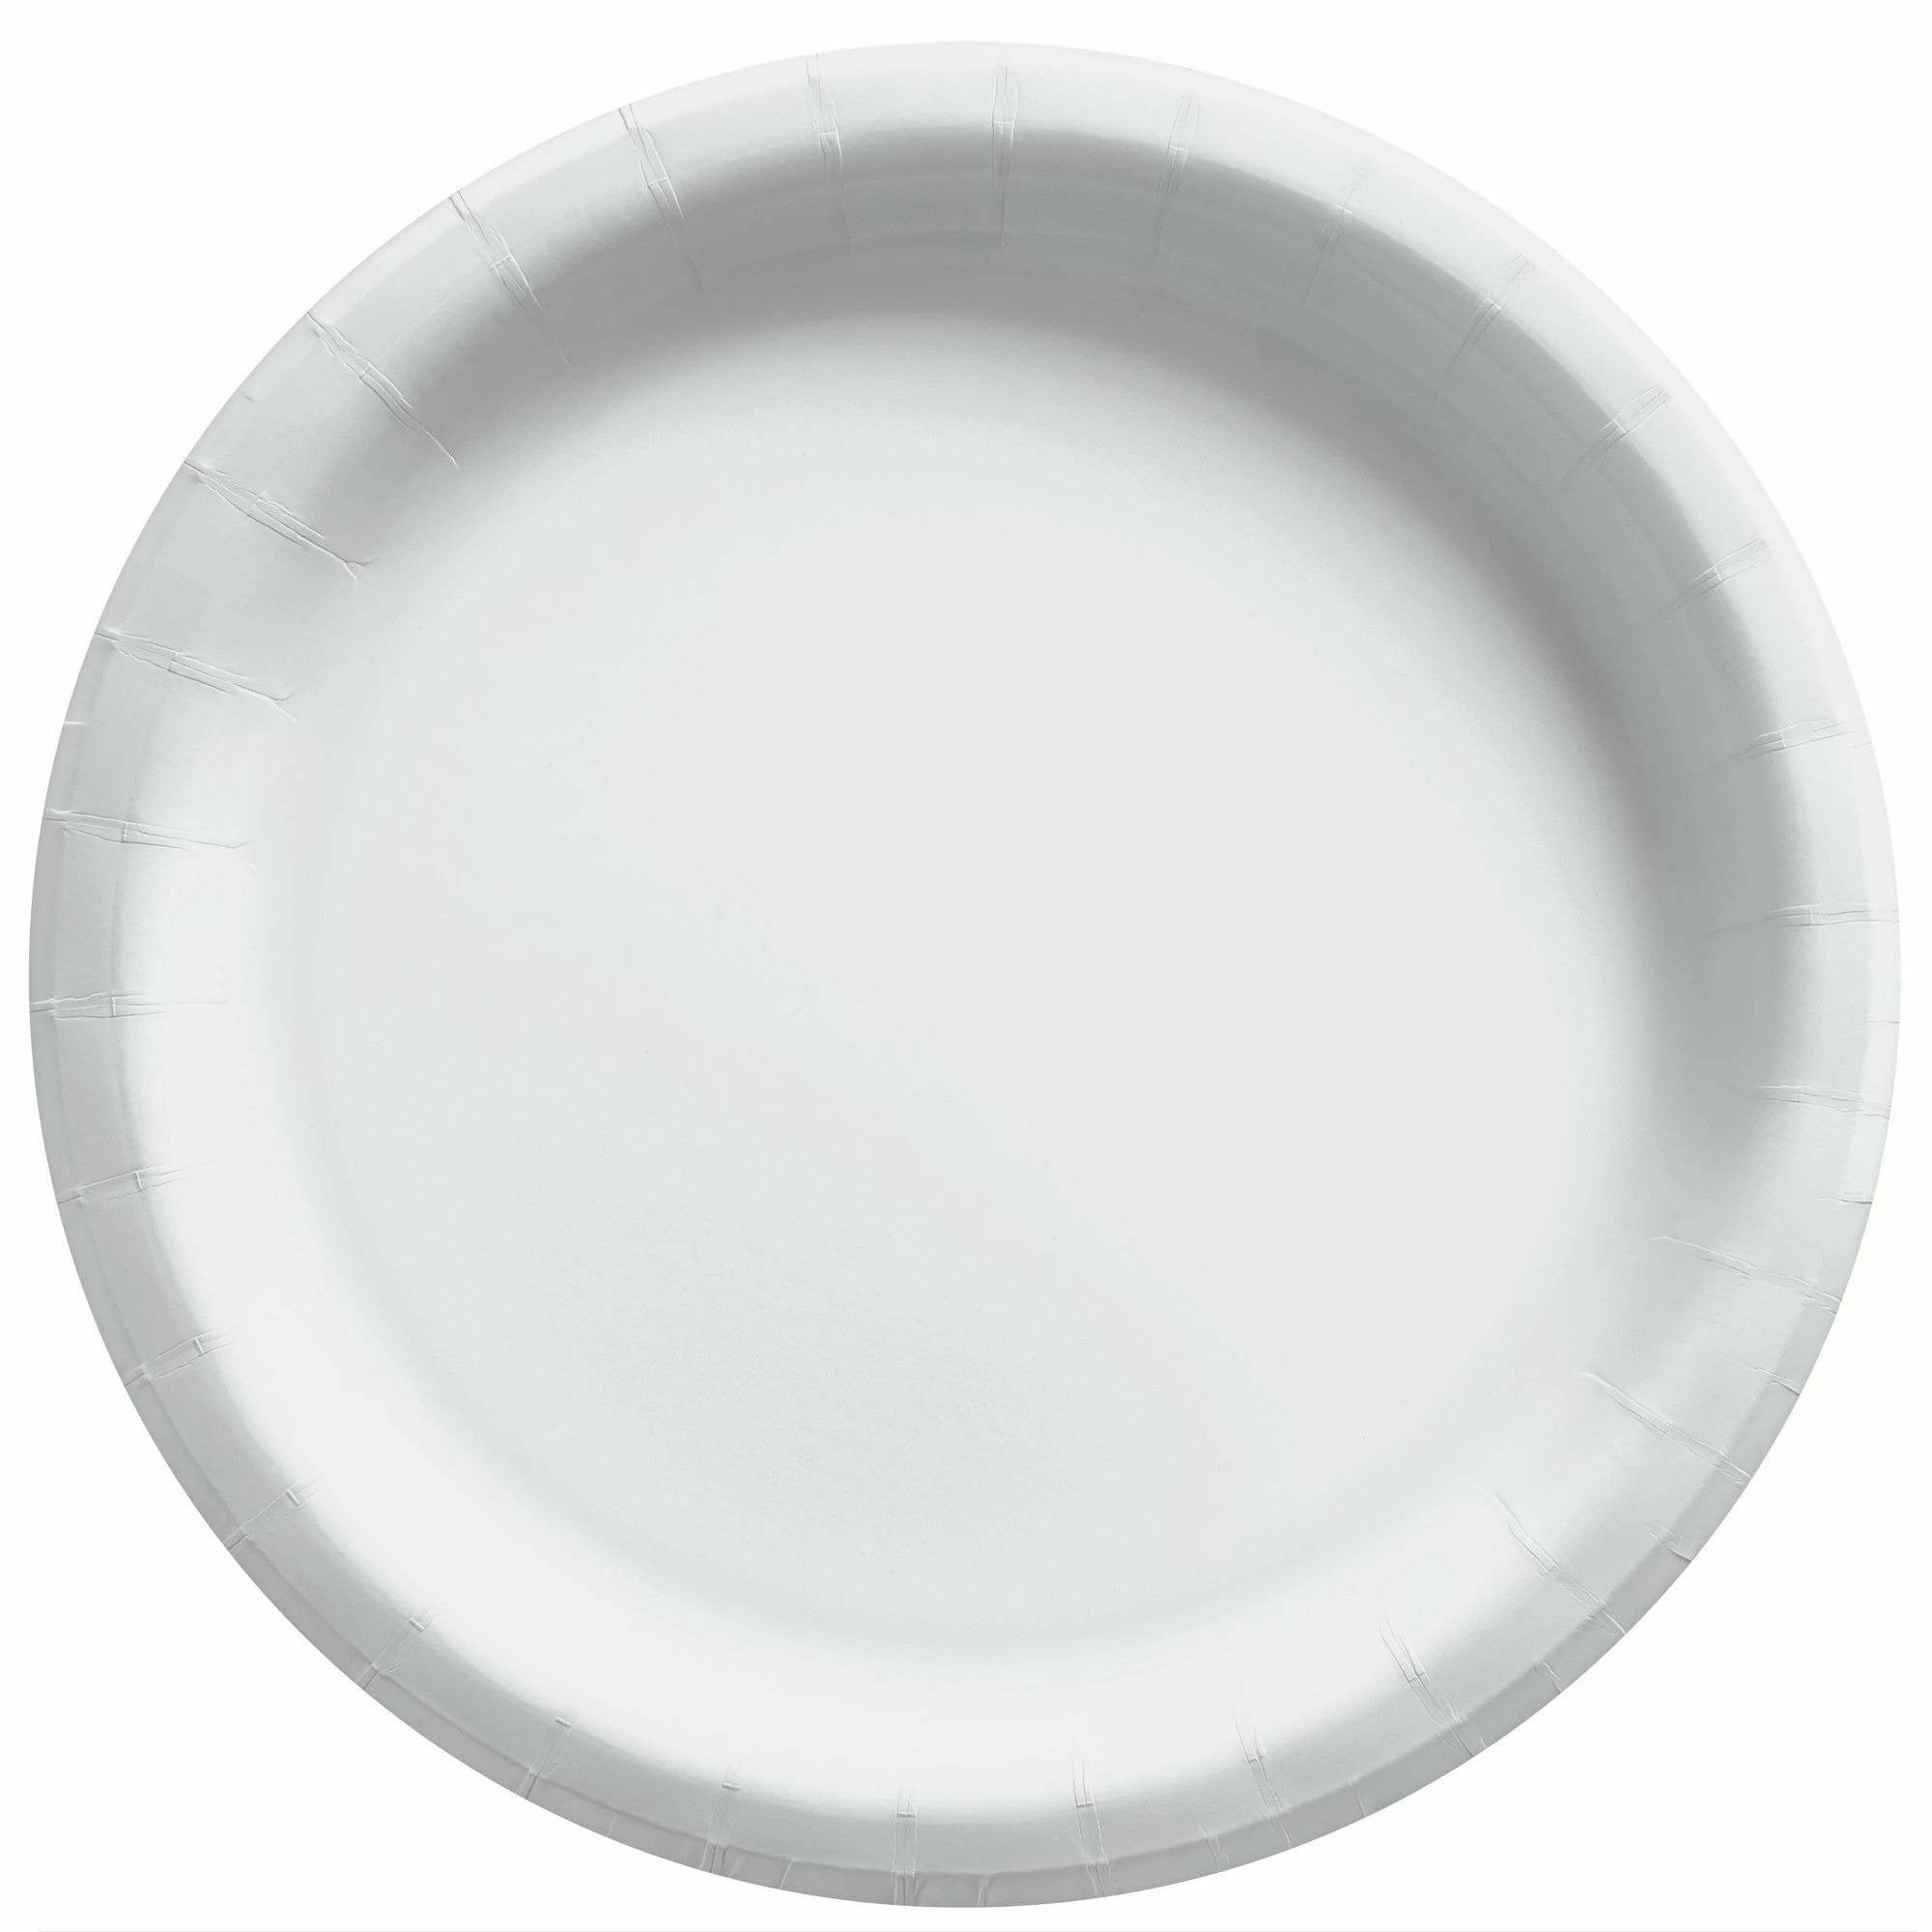 Amscan BASIC Frosty White - 10" Round Plastic Plates - 50 Count